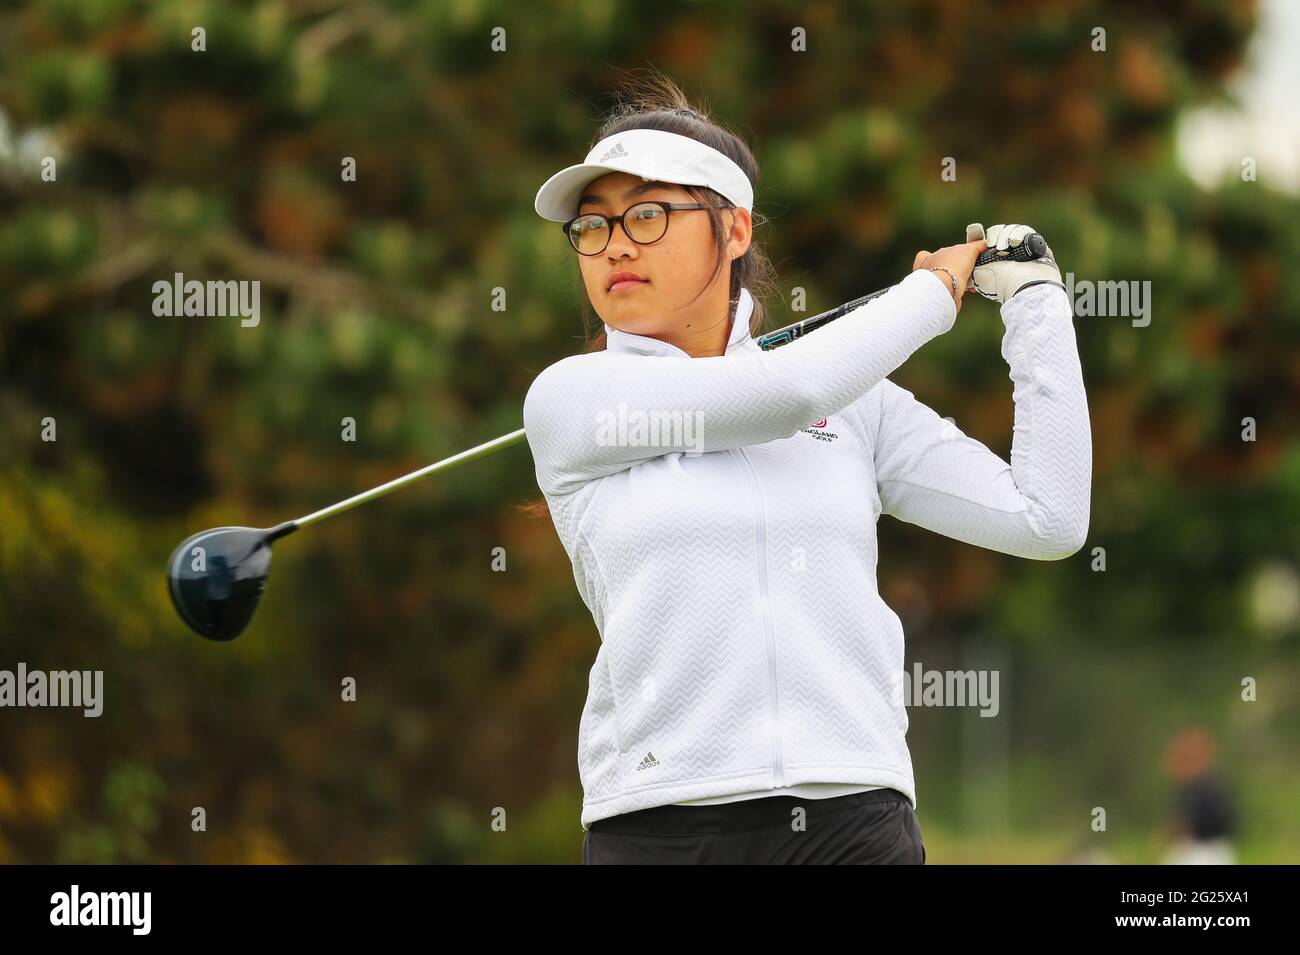 Troon, UK. 08th June, 2021. DAVINA XANH, representing Mendip Spring tees off at the 17th hole at Barassie Links while taking part in the Womans Amateur Championship. Davina Xanh is member of the English Girls National Squad and won the English Girls Amateur stroke play championship in 2020, Credit: Findlay/Alamy Live News Stock Photo